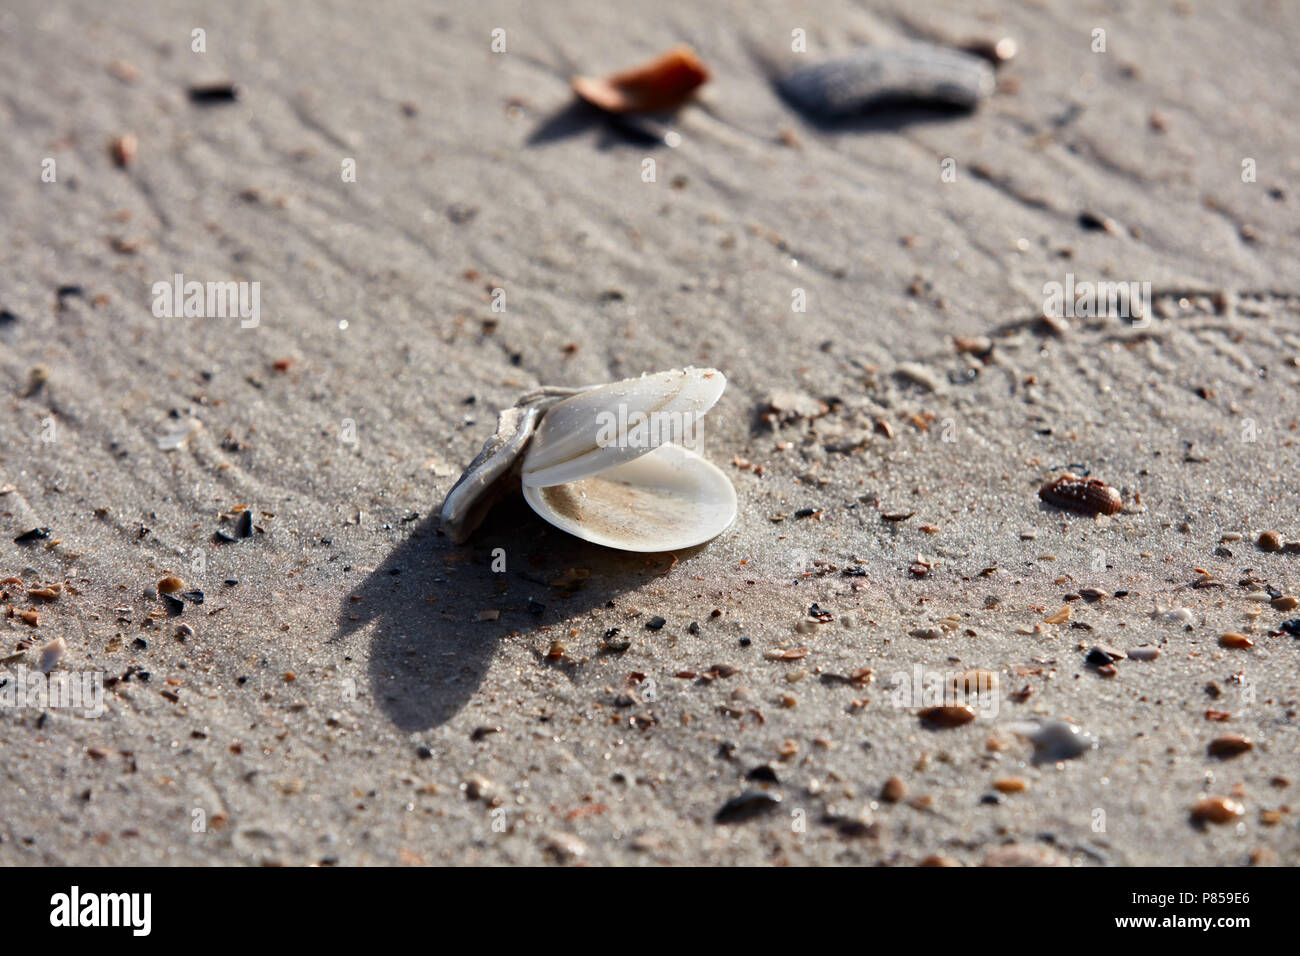 Open clam shell on a beach Stock Photo